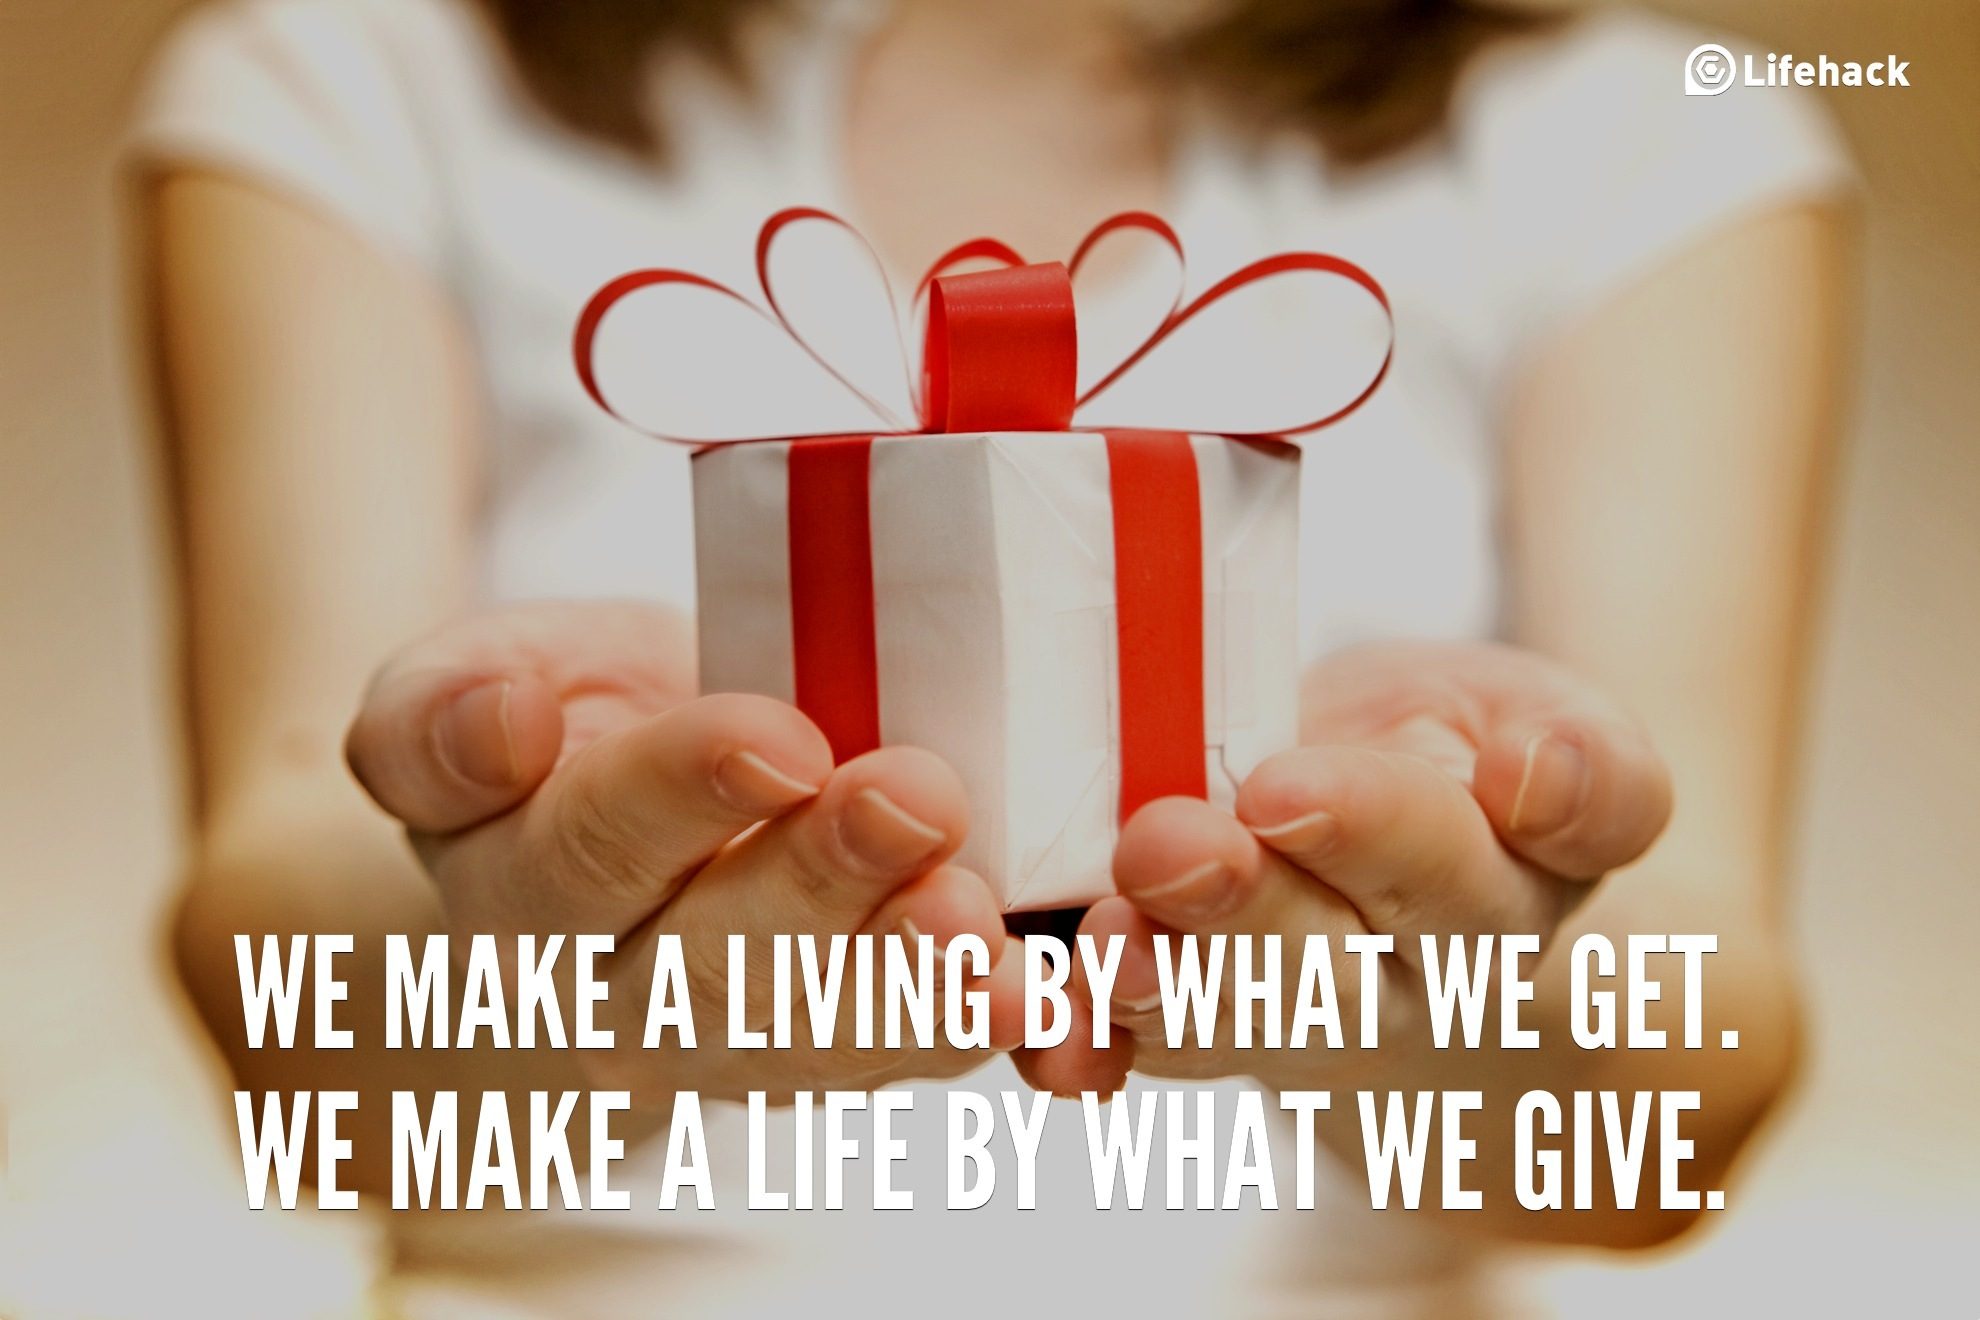 30sec Tip:  We Make a Life by What We Give